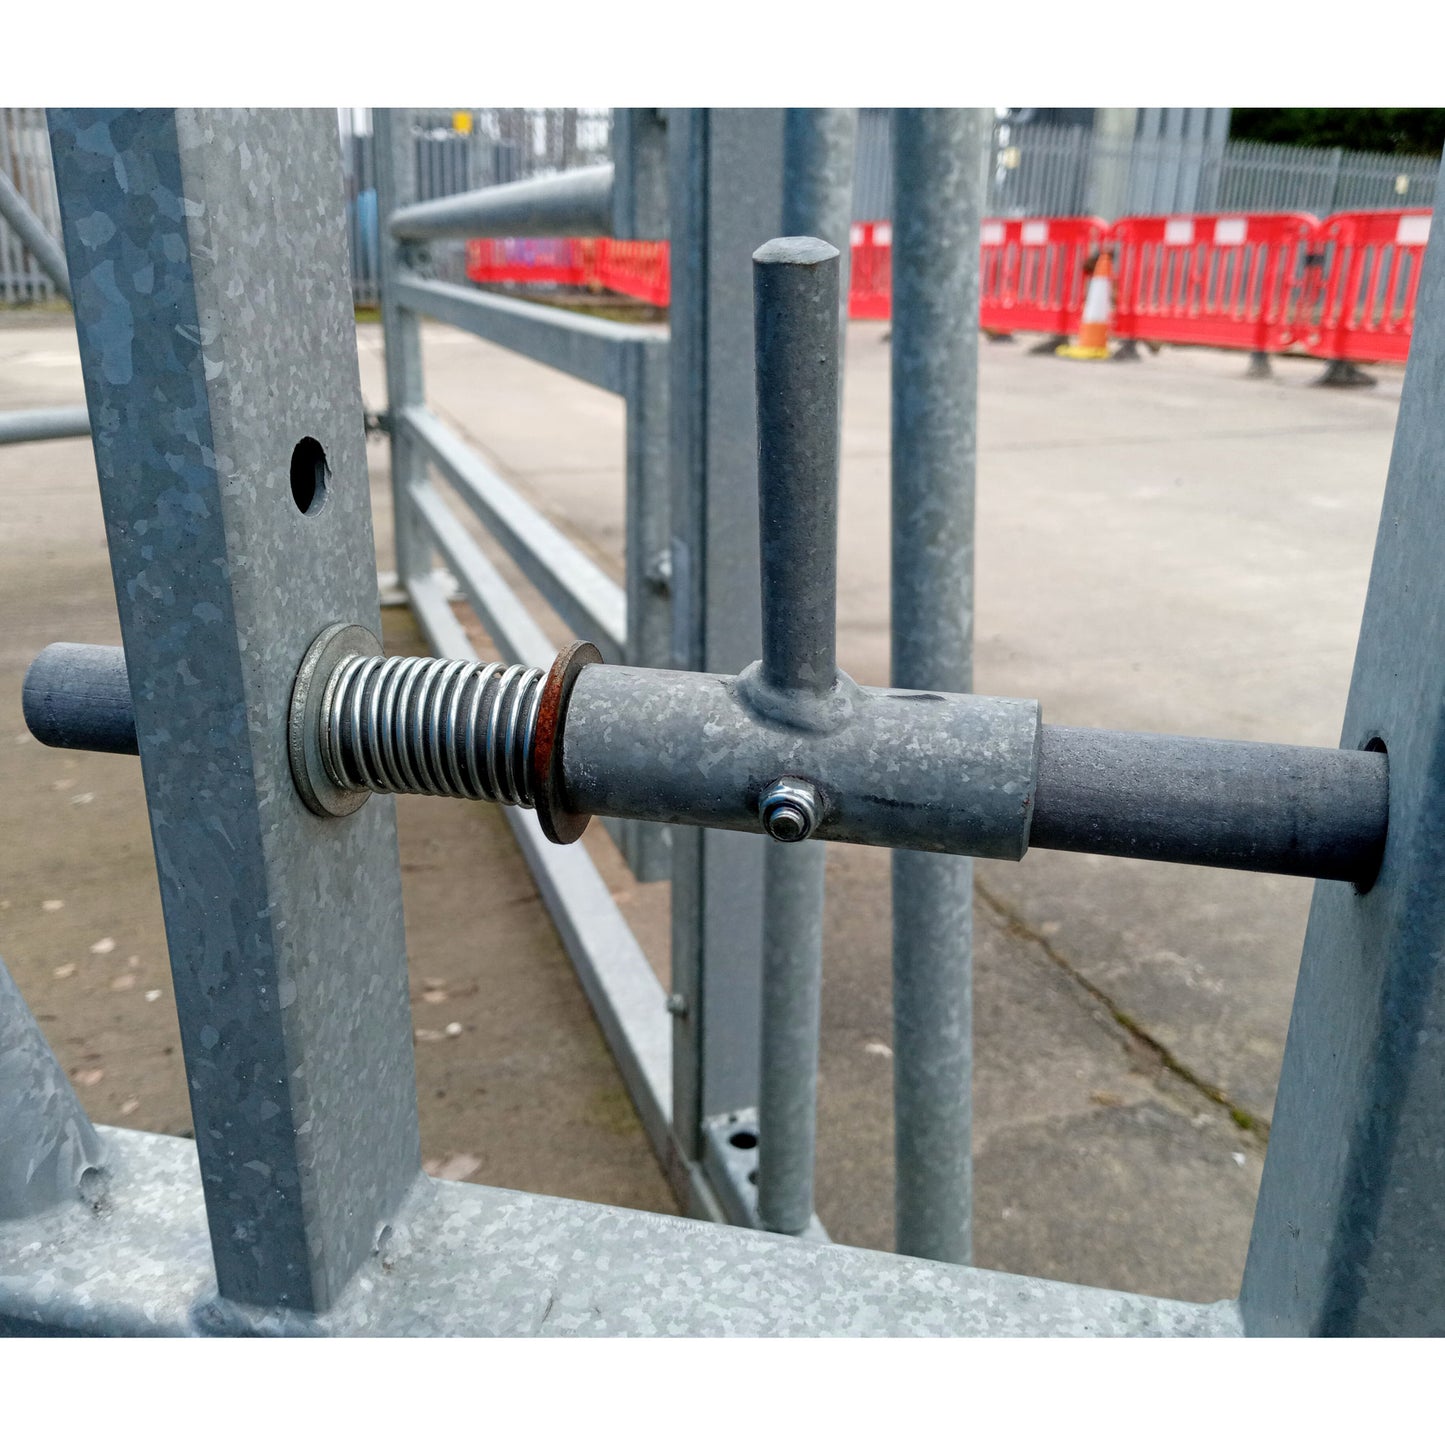 Ex-Display Market Diagonal Feed Barrier Gate Unit with timber base